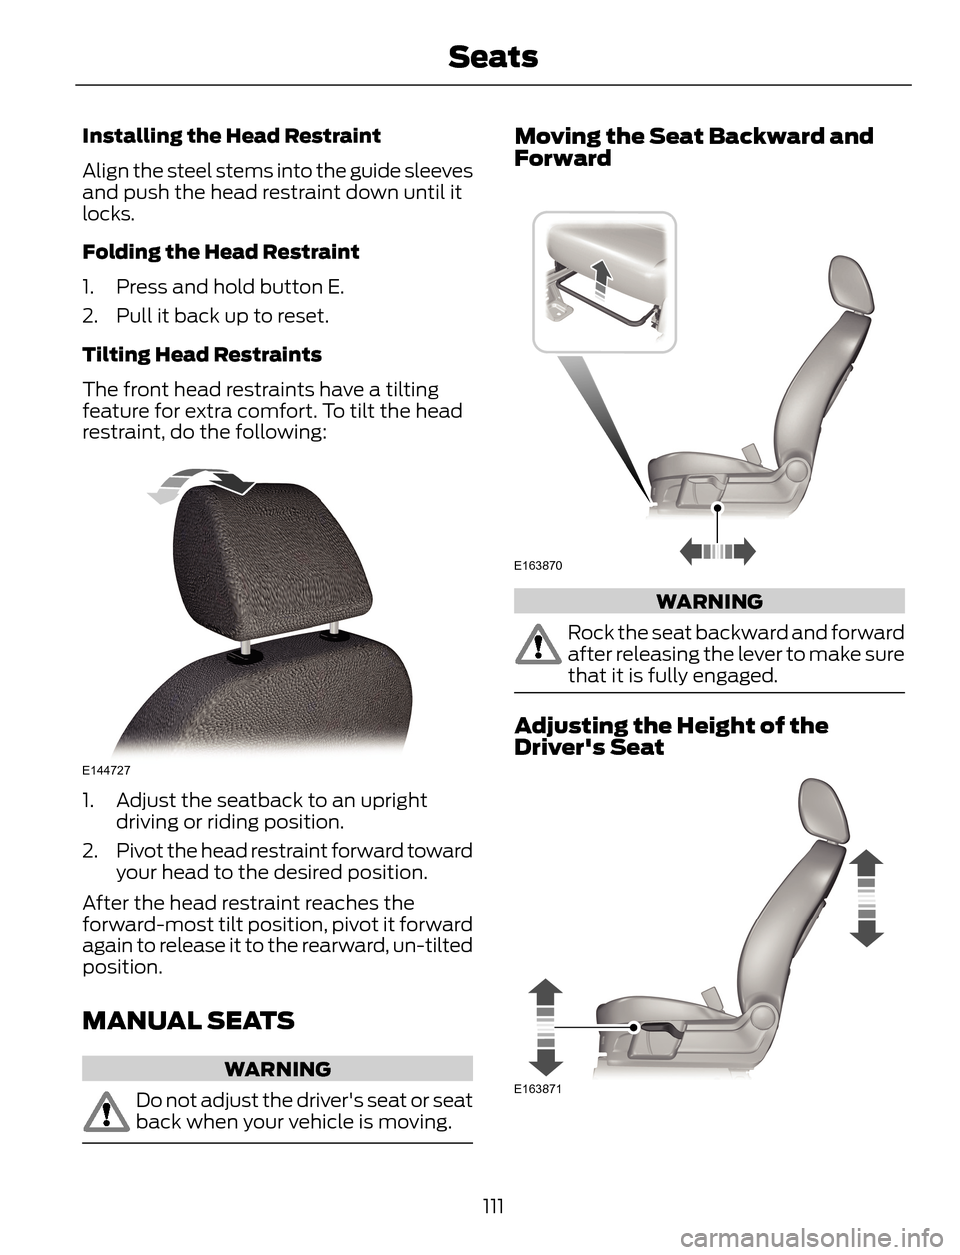 FORD ESCAPE 2014 3.G Owners Manual Installing the Head Restraint
Align the steel stems into the guide sleeves
and push the head restraint down until it
locks.
Folding the Head Restraint
1. Press and hold button E.
2. Pull it back up to